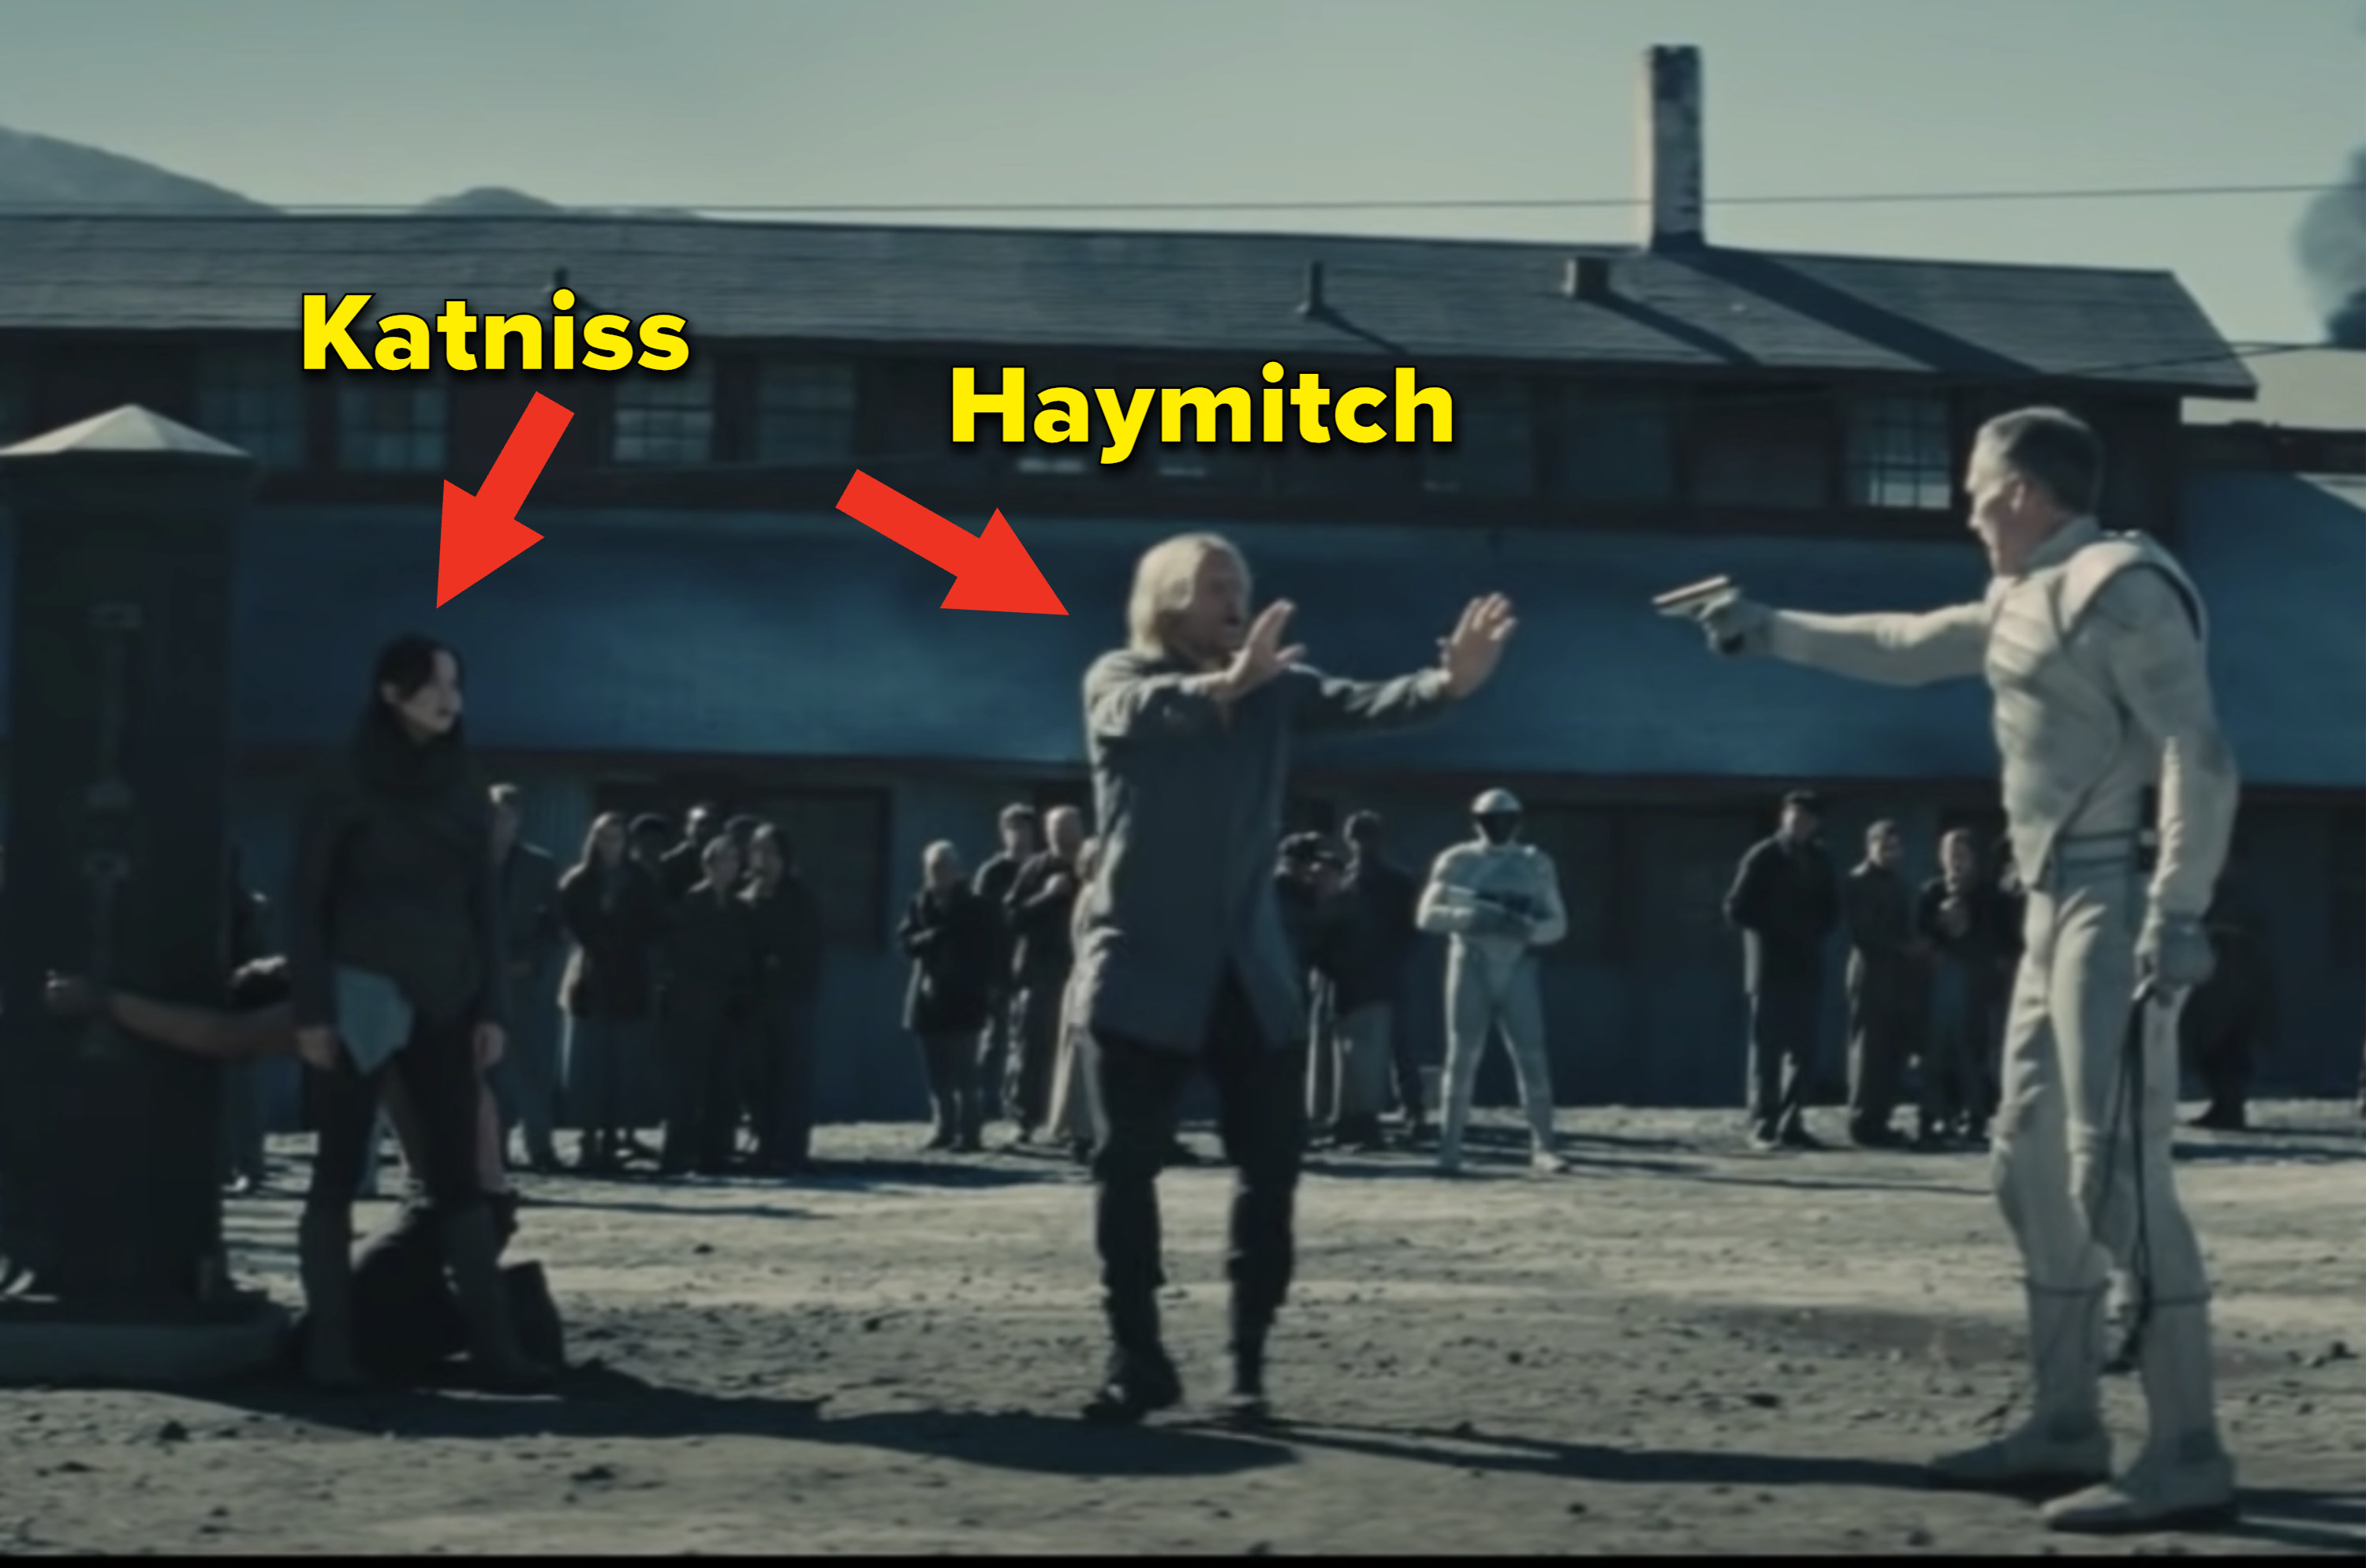 Haymitch standing between a guard with a gun and Katniss